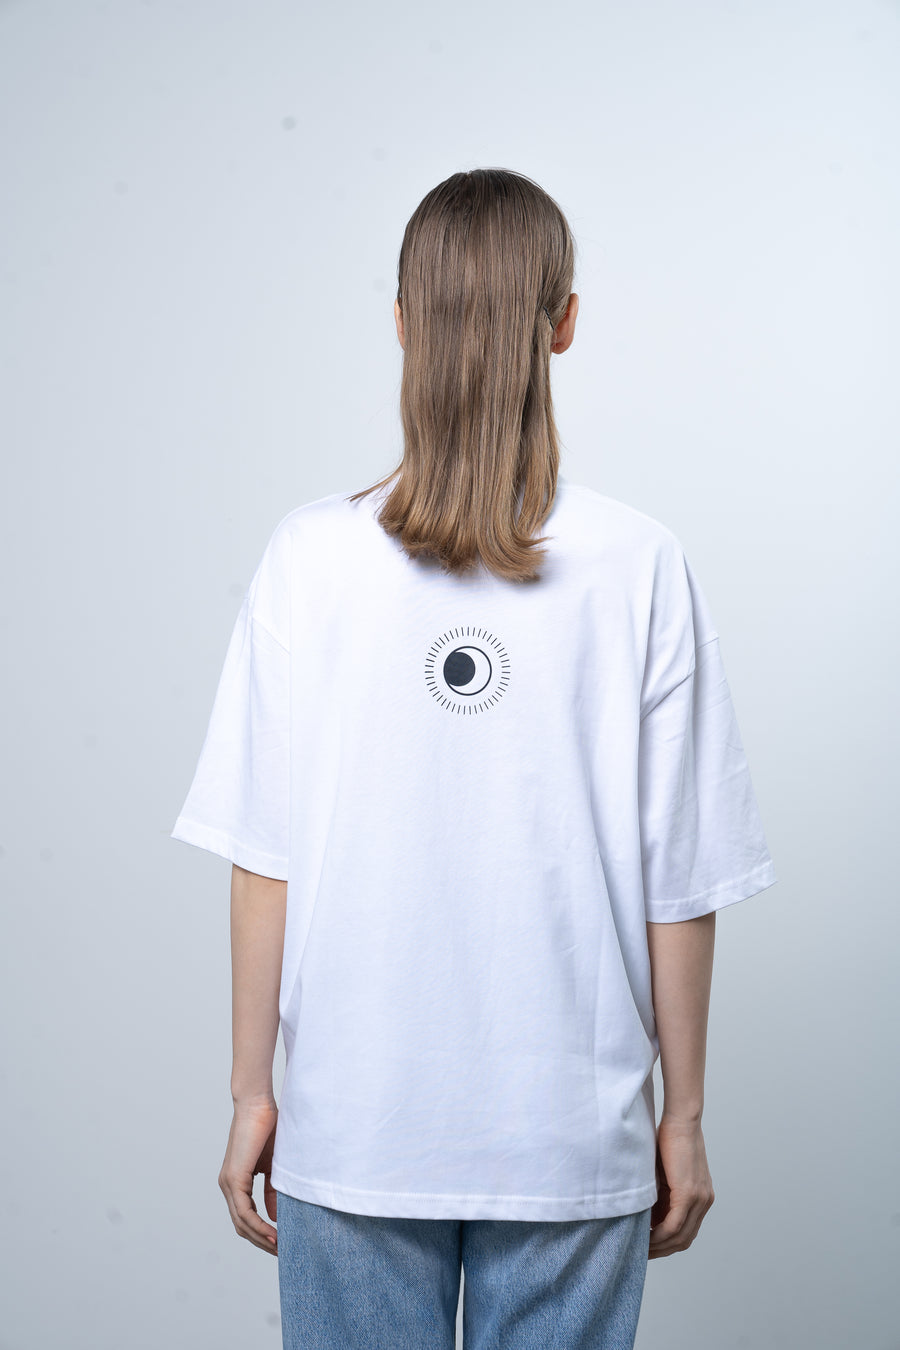 THE ECLIPSE T-SHIRT